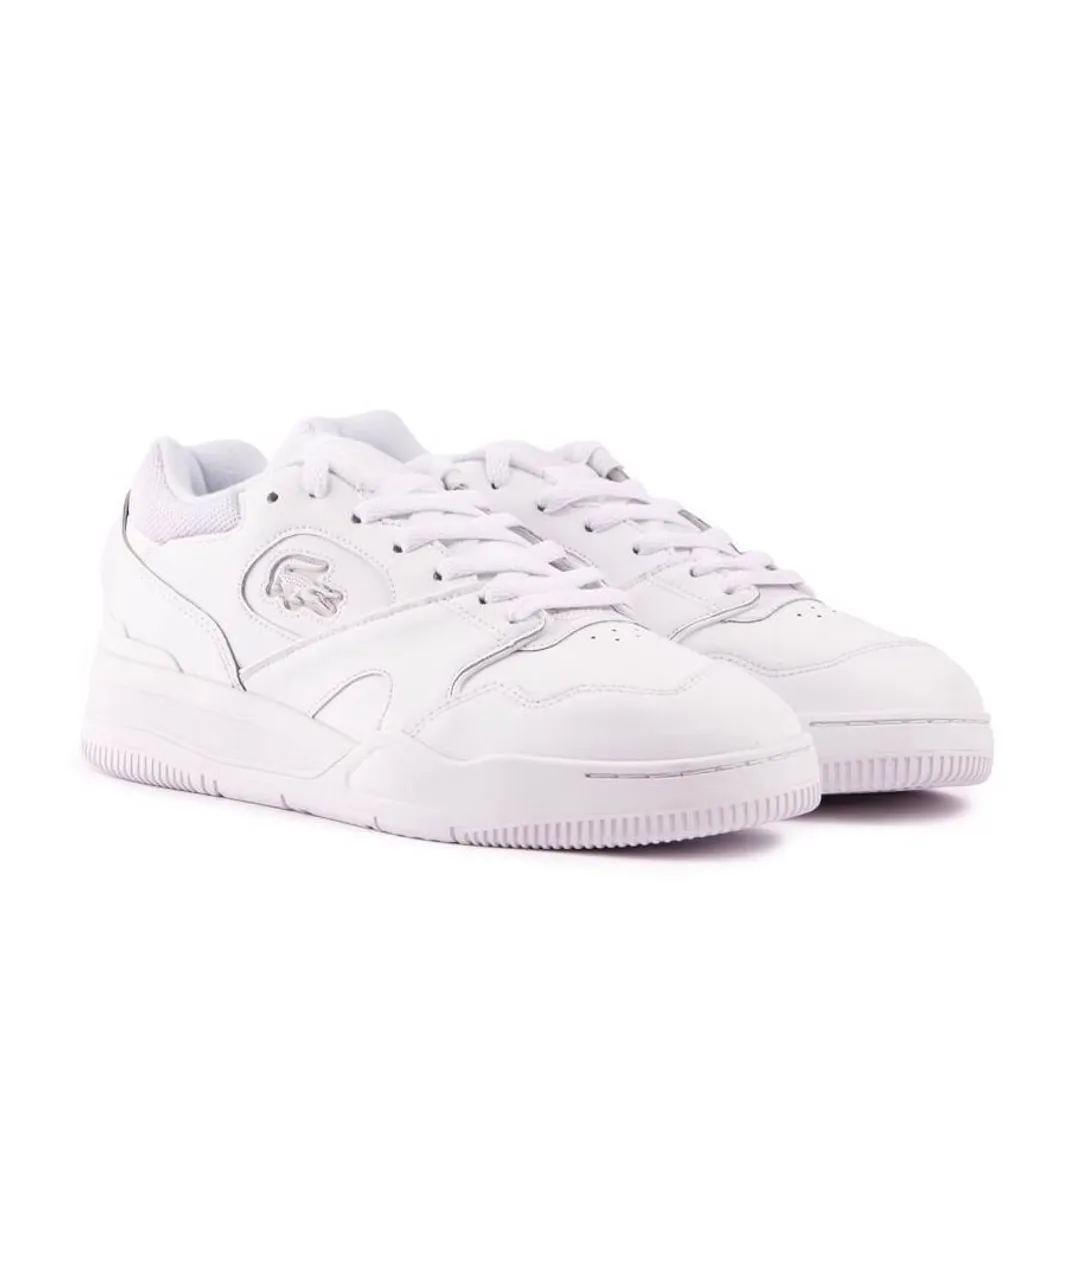 Lacoste Mens Line Shot Trainers - White